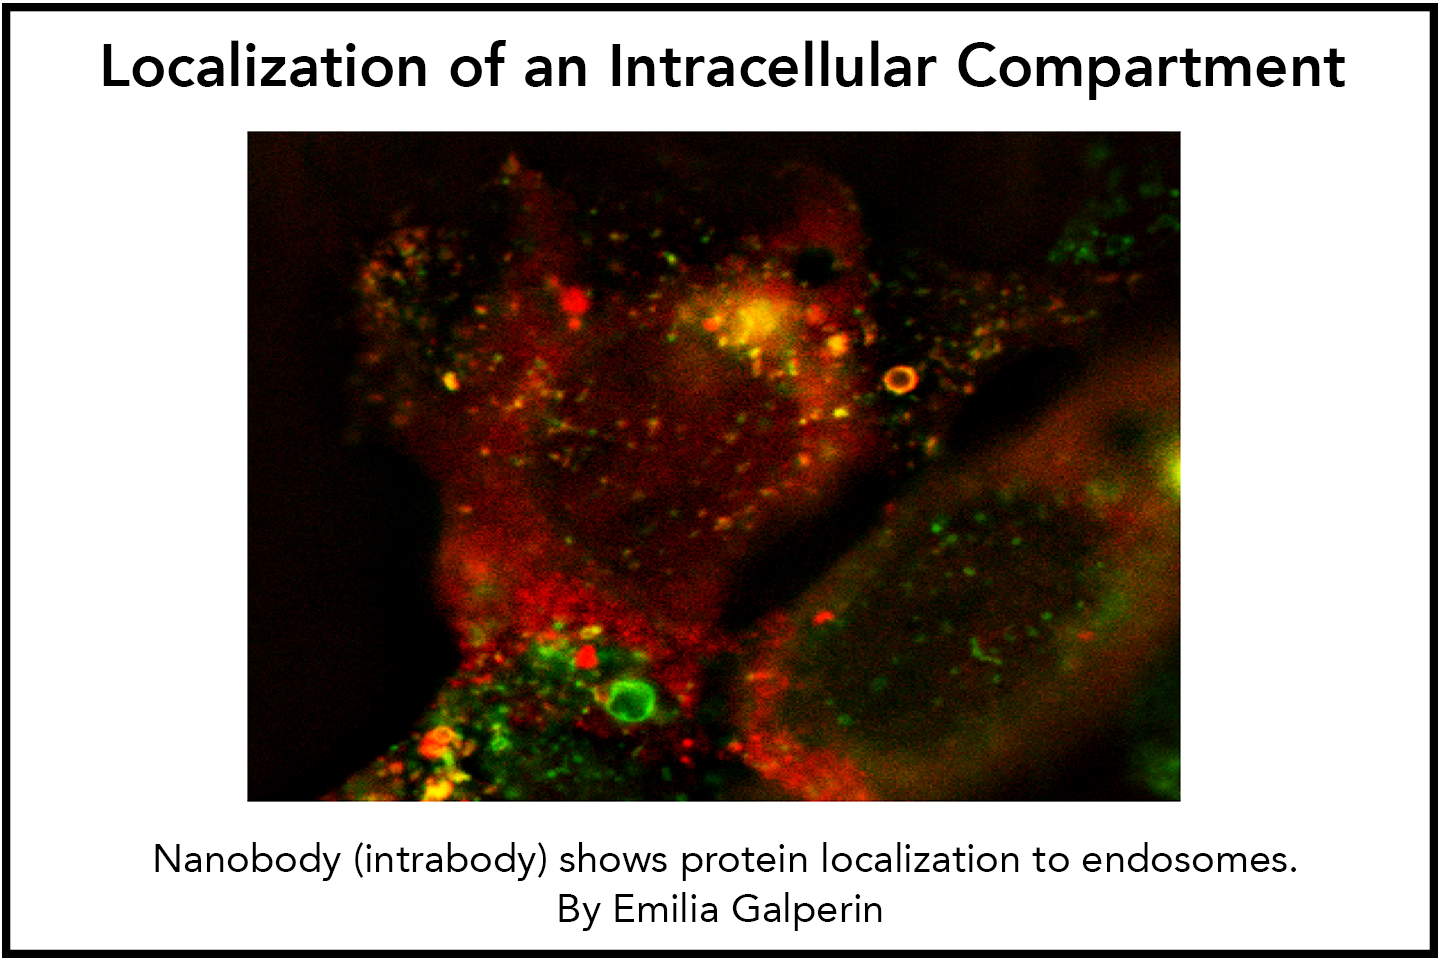 Localization of an Intracellular Compartment: Nanobody (intrabody) shows protein localization to endosomes.